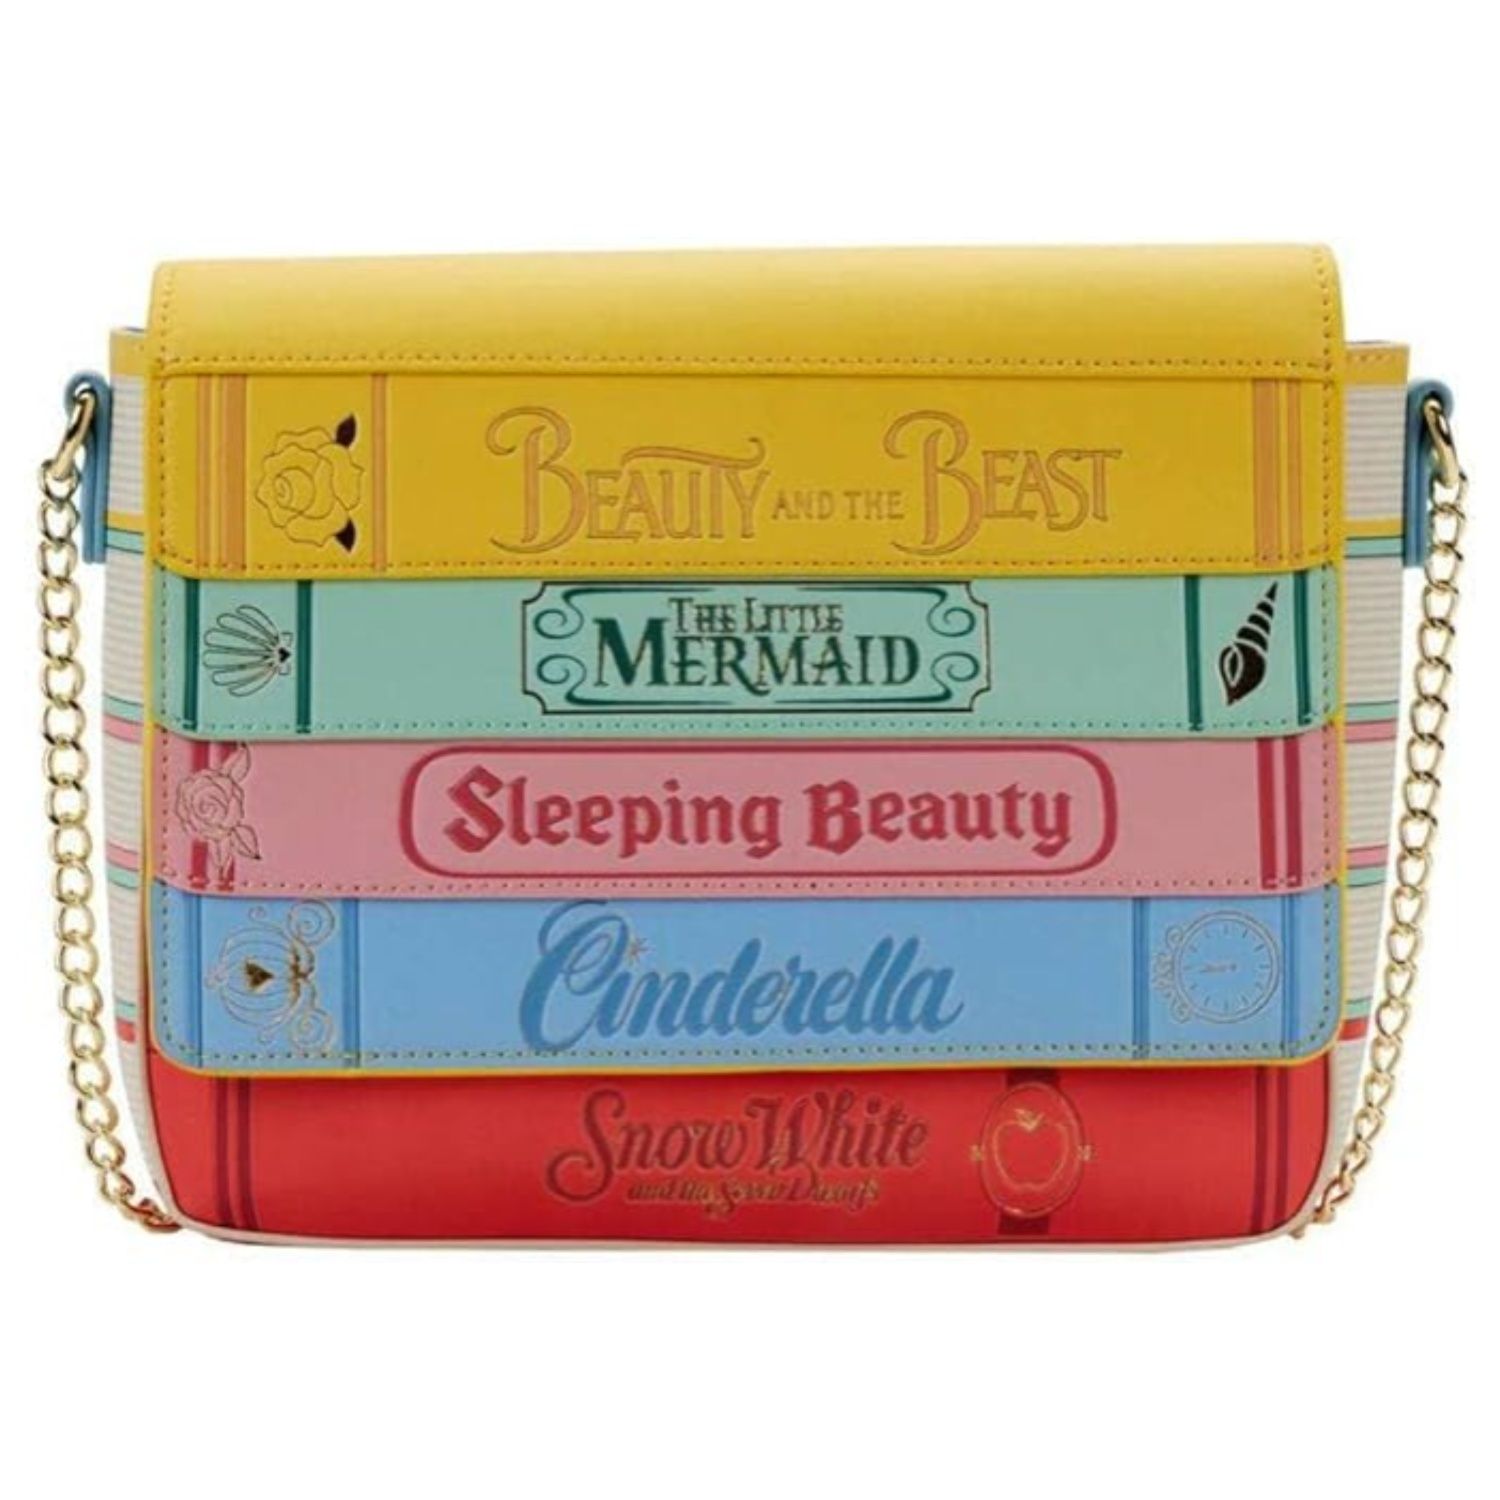 This purse is shaped like a stack of books with the Disney Princess titles on it. 